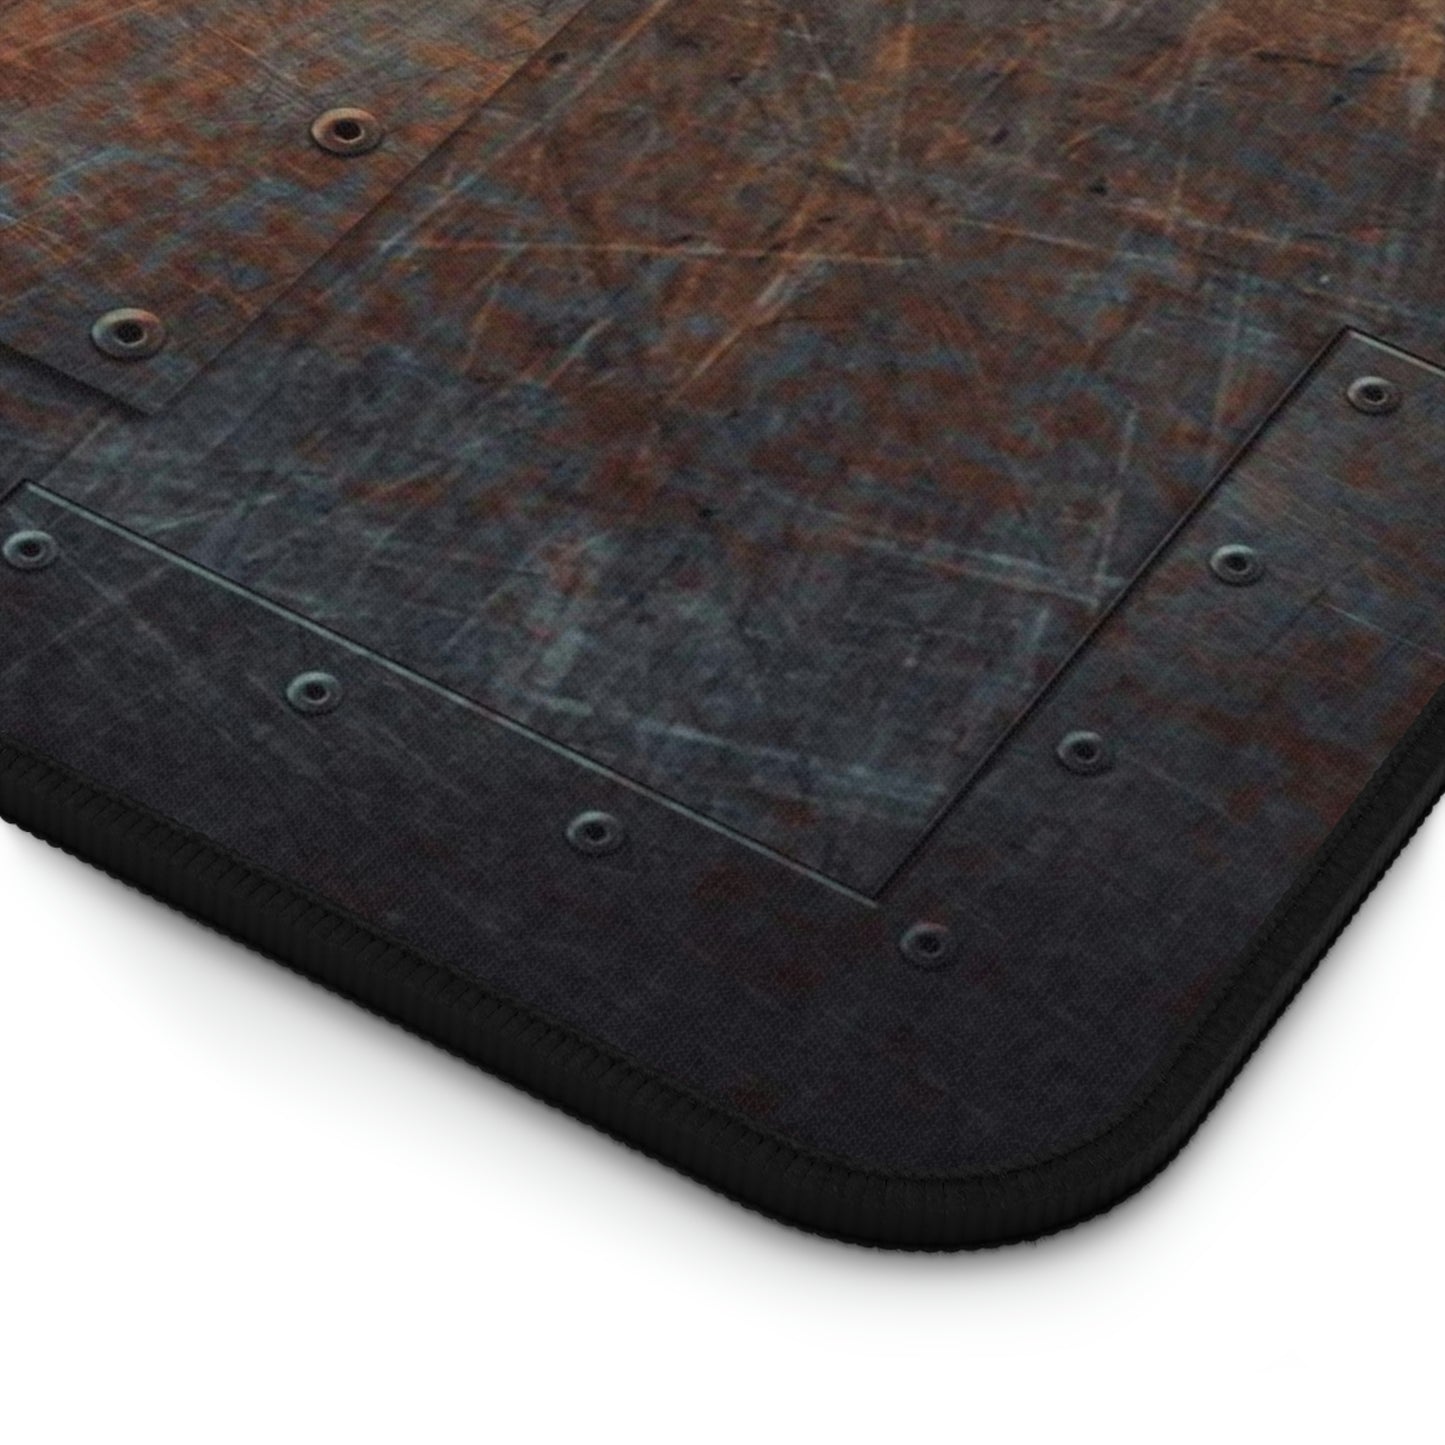 Steampunk Themed Desk Accessories - Patinated, Weather Beaten, Riveted Copper Sheets Print on Neoprene Desk Mat close up